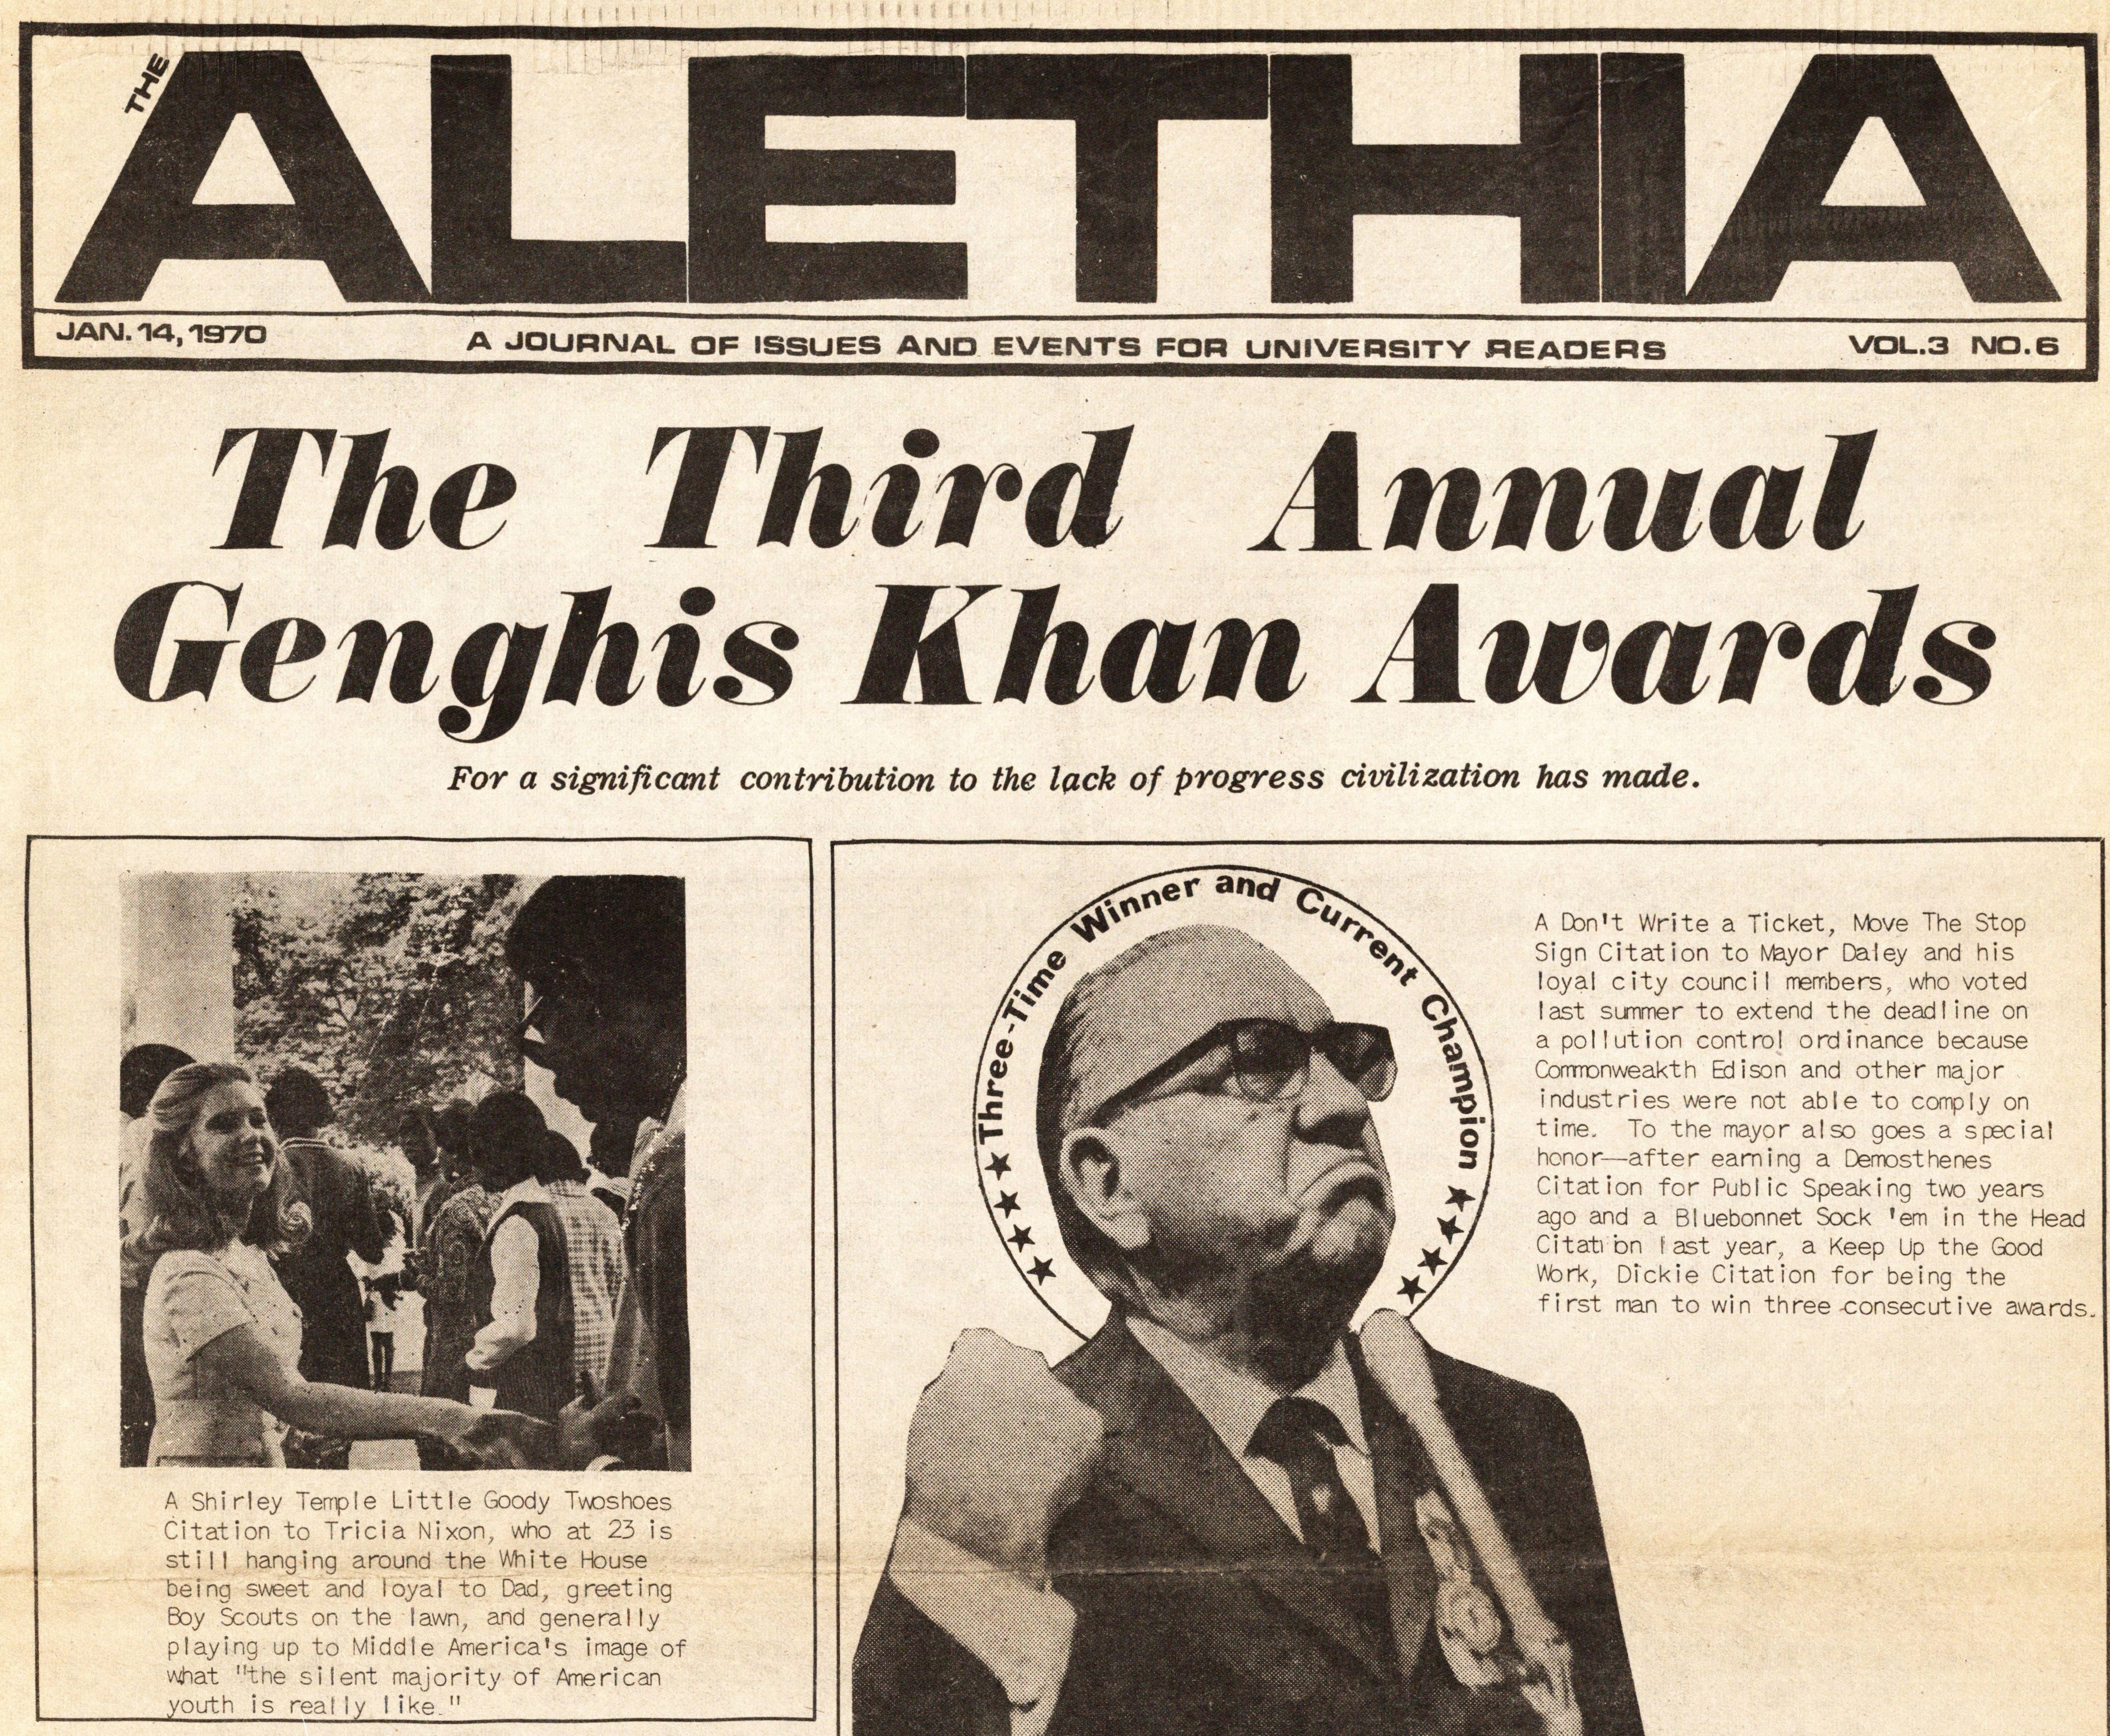 The Aletheia's Third Annual Genghis Khan Awards, awarded to individuals responsible for "the 